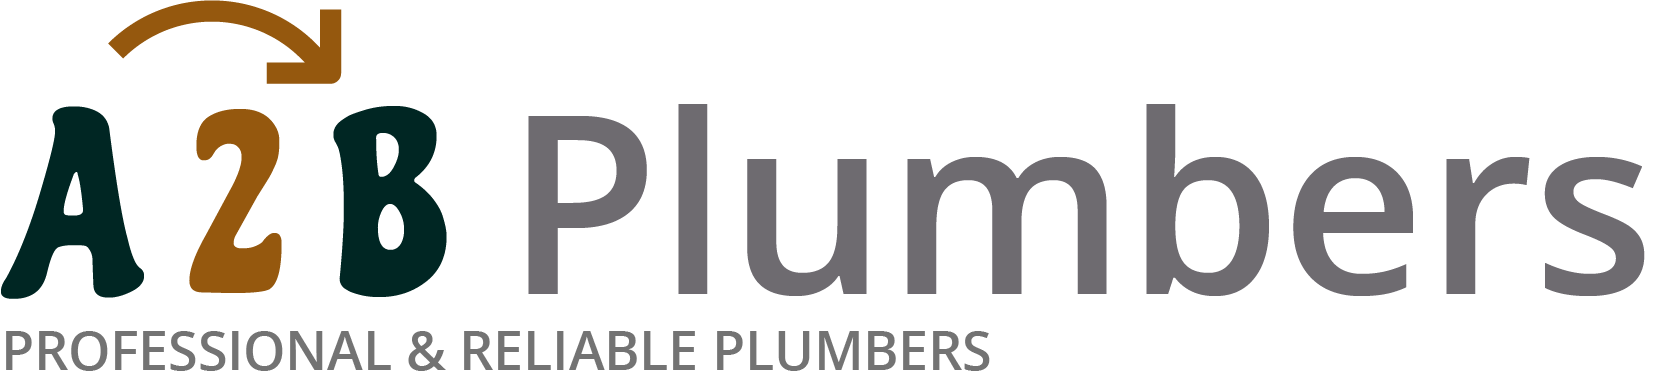 If you need a boiler installed, a radiator repaired or a leaking tap fixed, call us now - we provide services for properties in Burntwood and the local area.